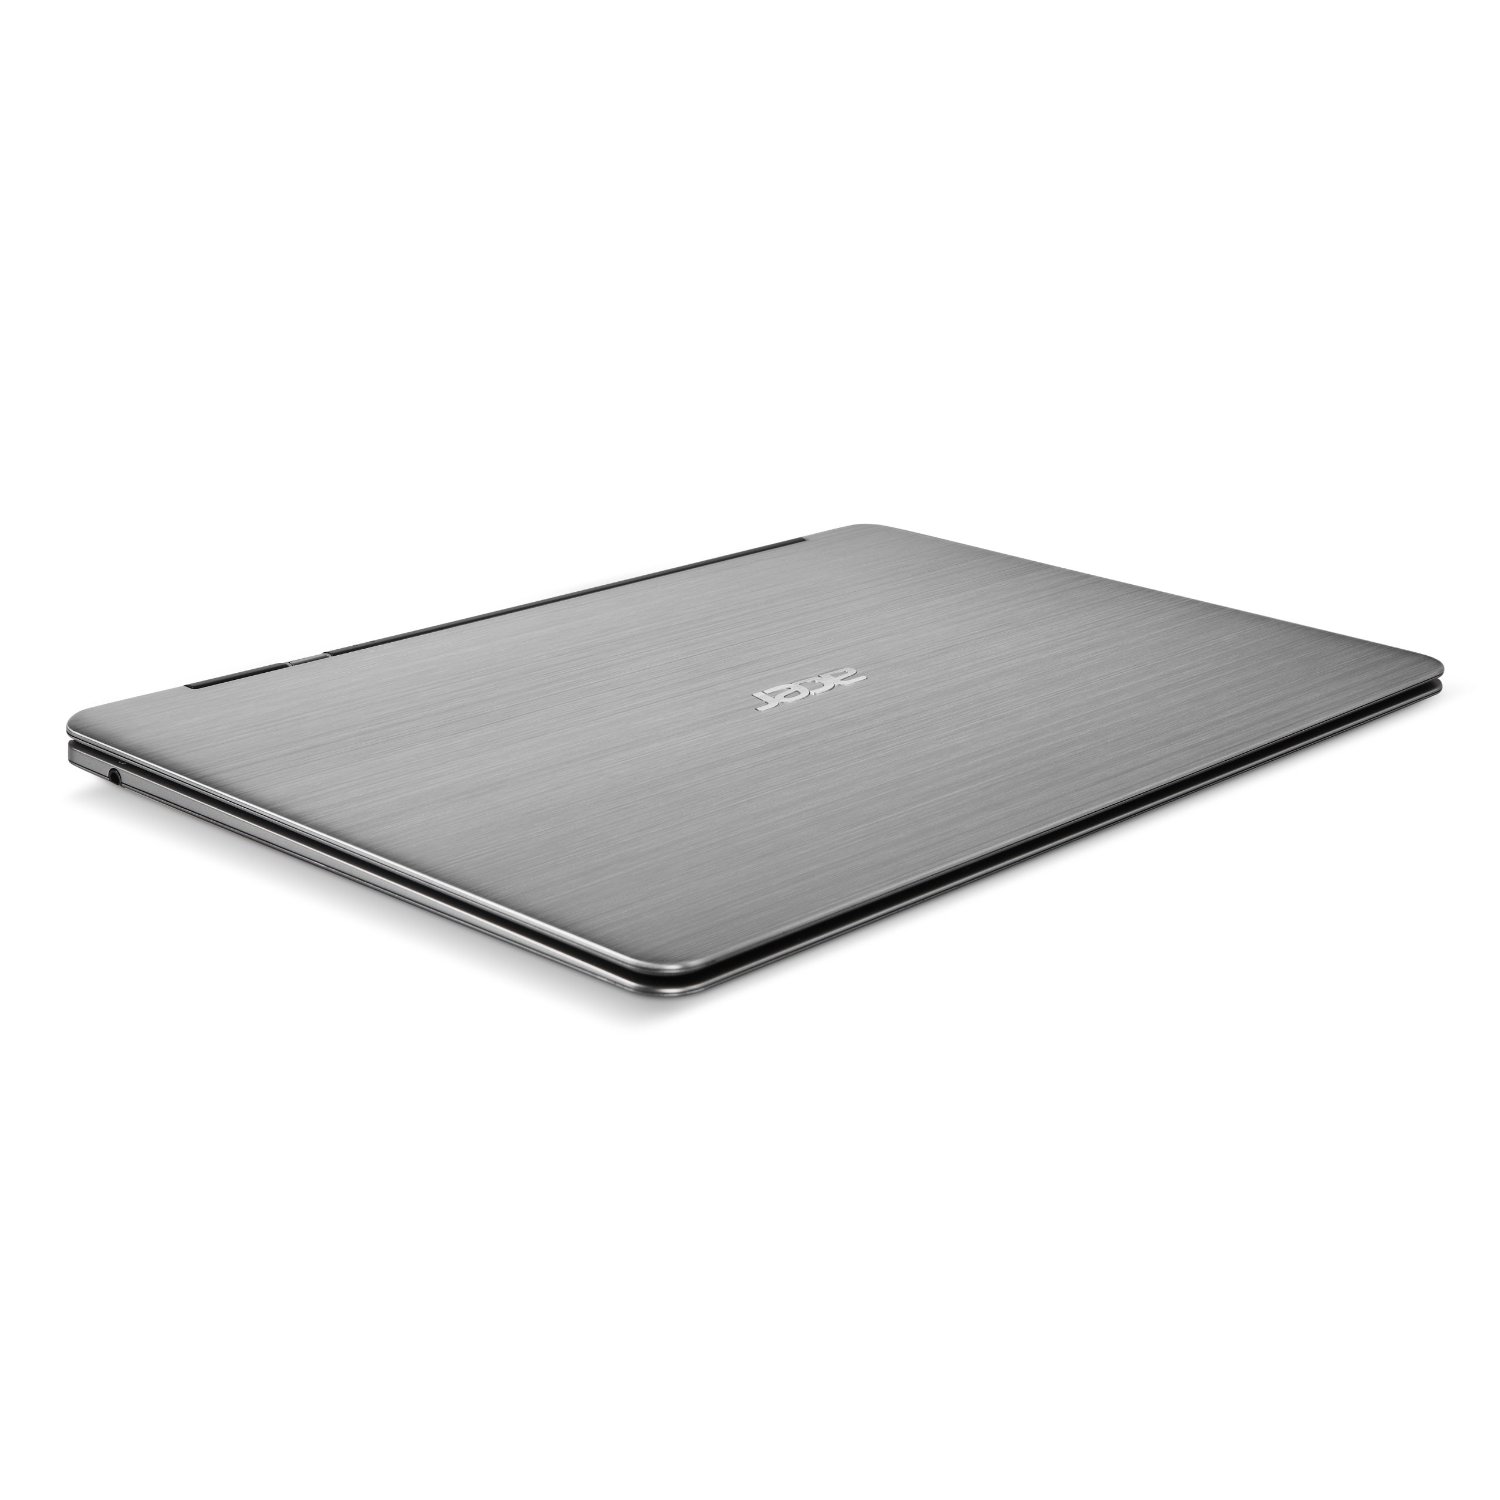 http://thetechjournal.com/wp-content/uploads/images/1110/1318646337-acer-aspire-s39516646-ultrabook-with-133inch-hd-display-12.jpg